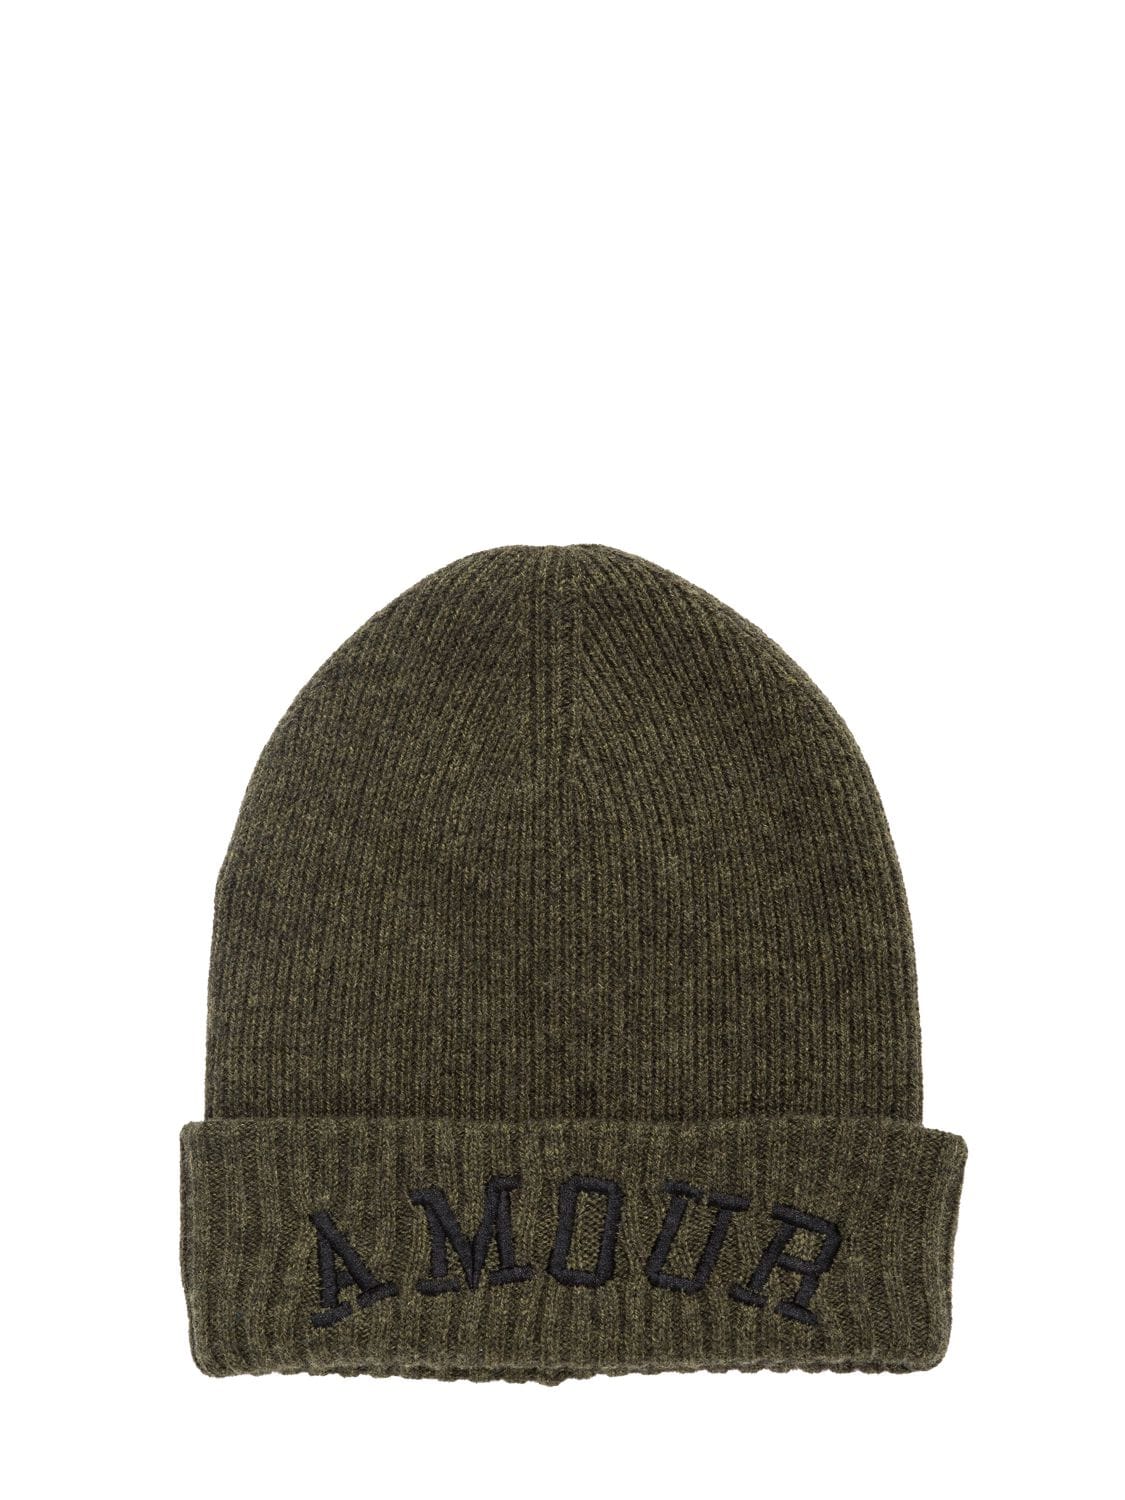 Zadig & Voltaire Kids' Embroidered Wool Blend Knit Beanie In Military Green